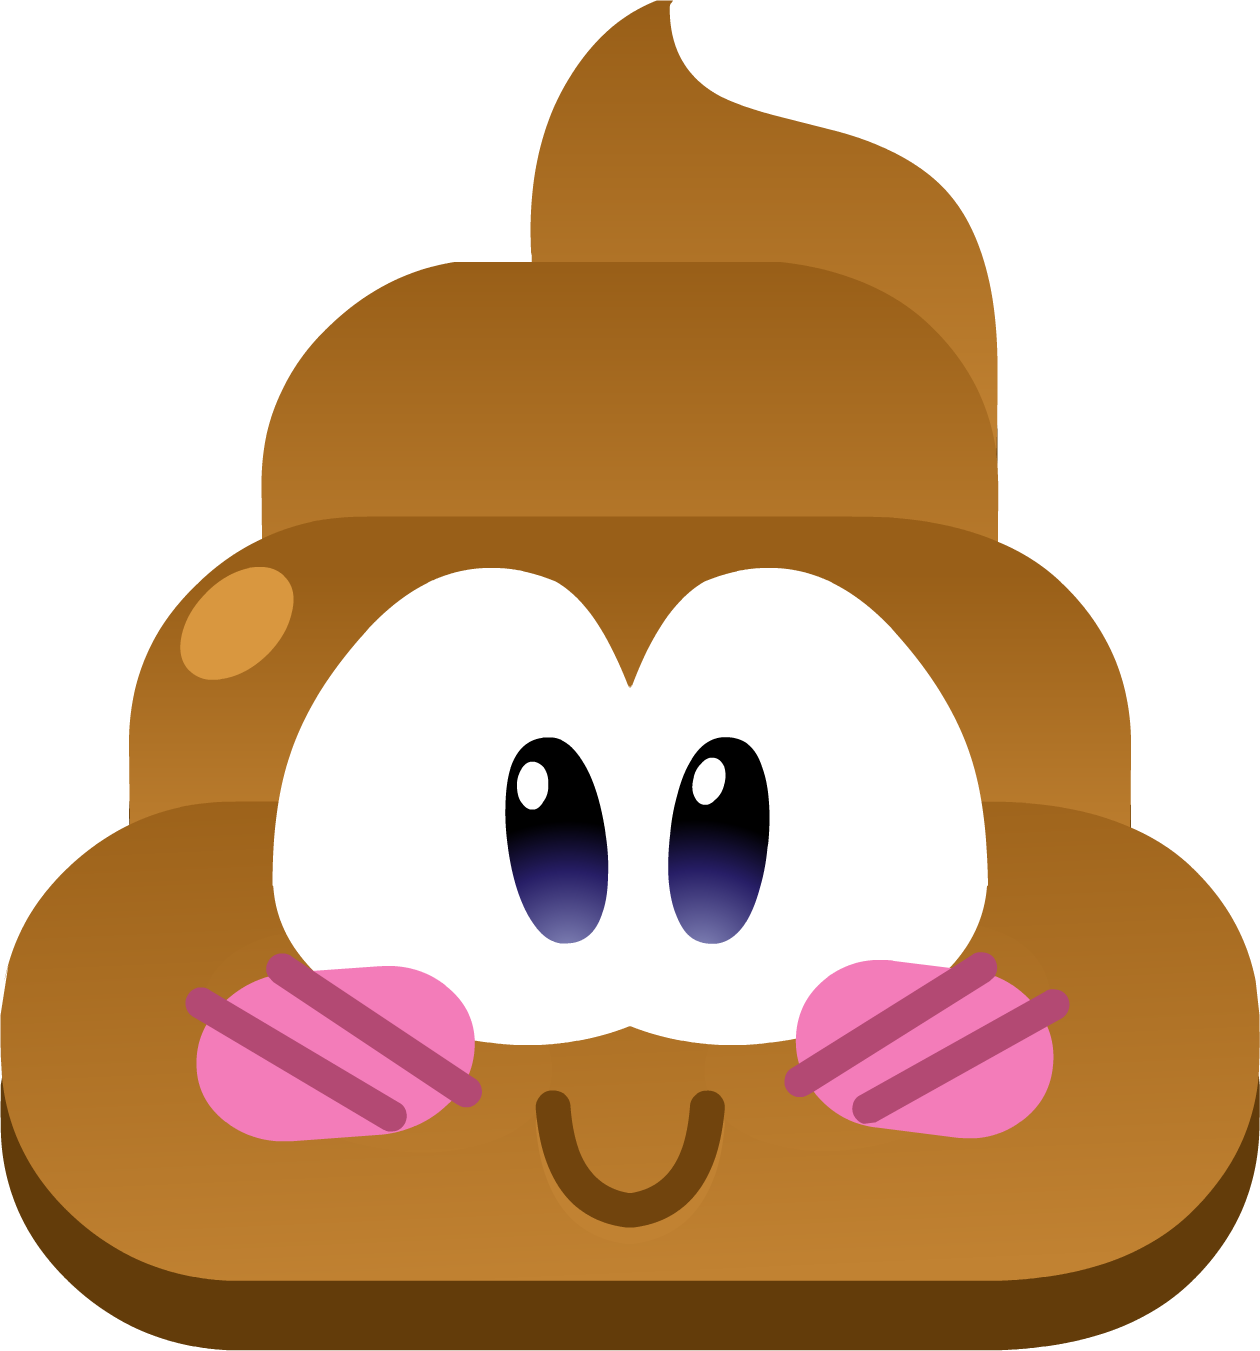 Funny Poop Emoji Png 42523 Free Icons And Png Backgrounds | Images and ...